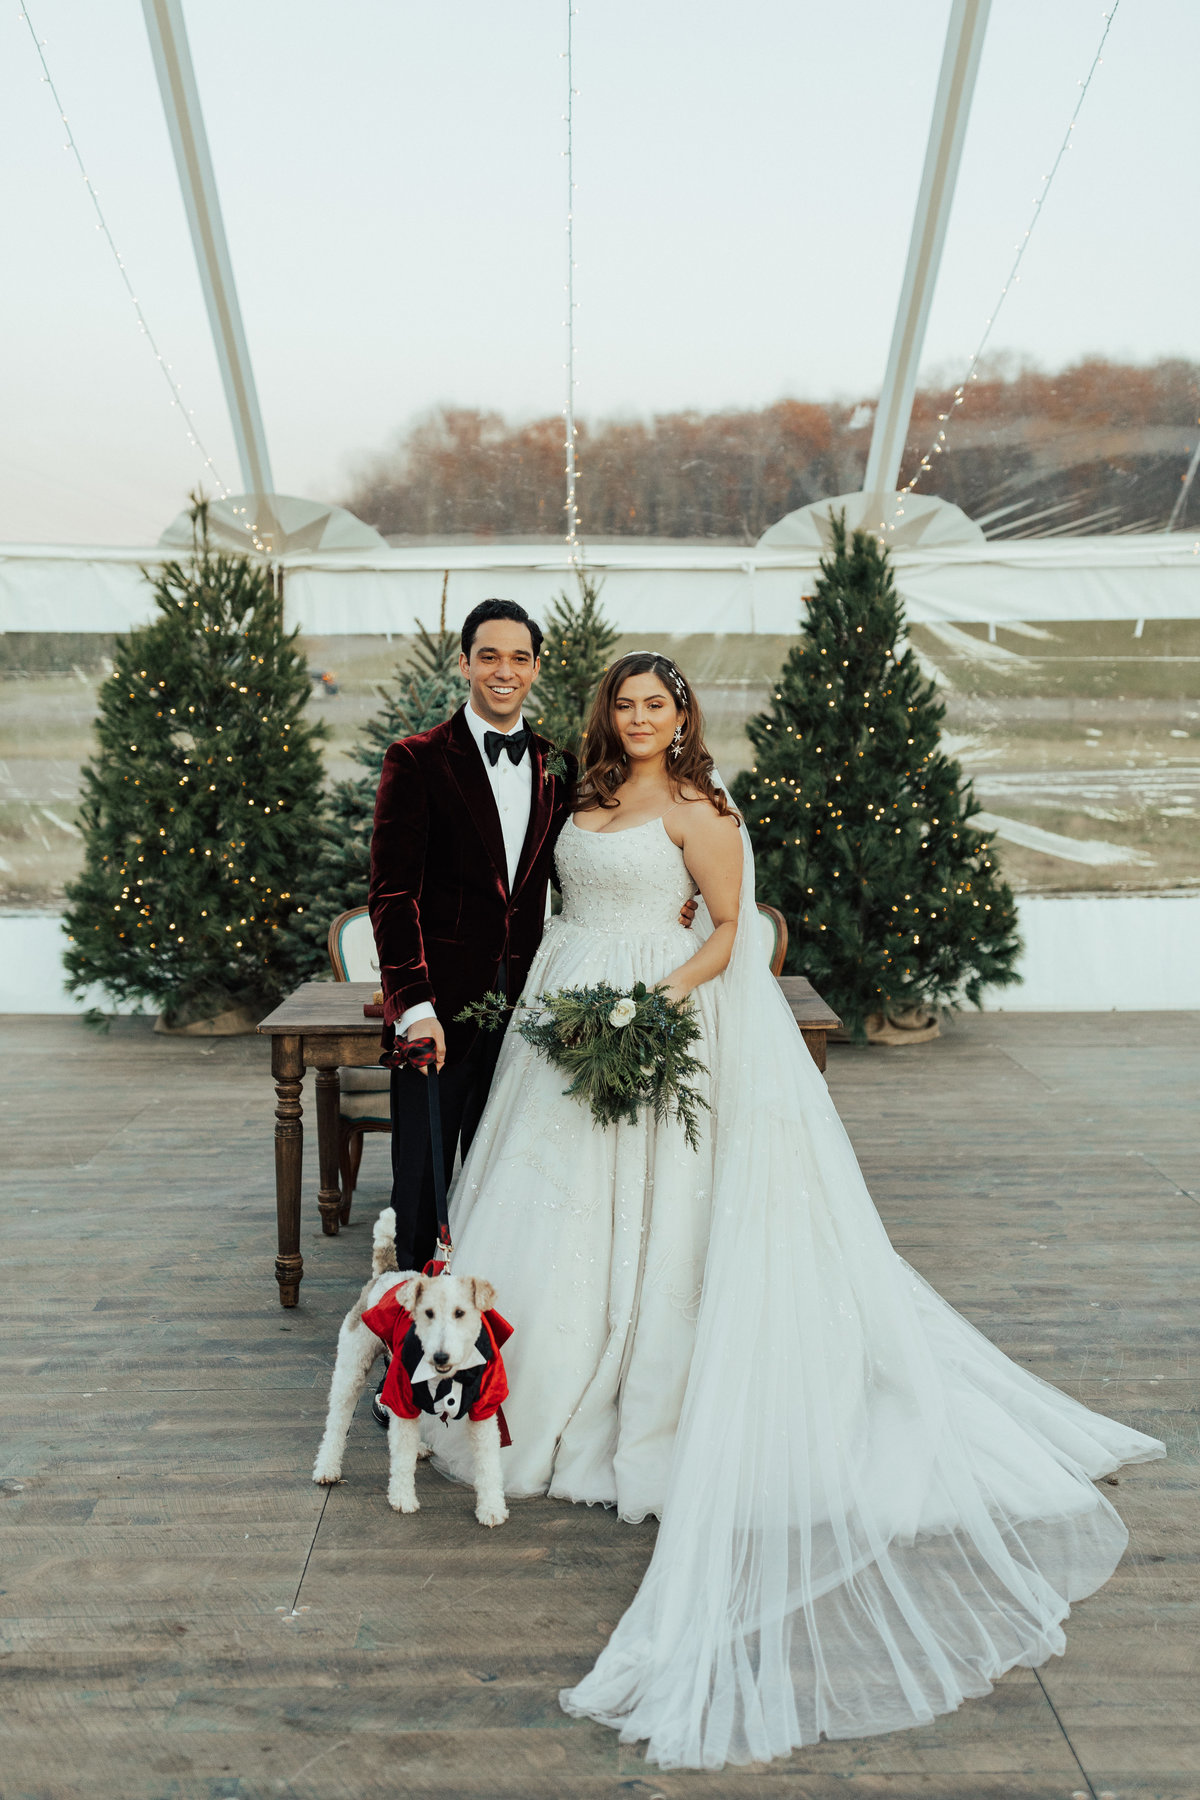 Christy-l-Johnston-Photography-Monica-Relyea-Events-Noelle-Downing-Instagram-Noelle_s-Favorite-Day-Wedding-Battenfelds-Christmas-tree-farm-Red-Hook-New-York-Hudson-Valley-upstate-november-2019-AP1A9175